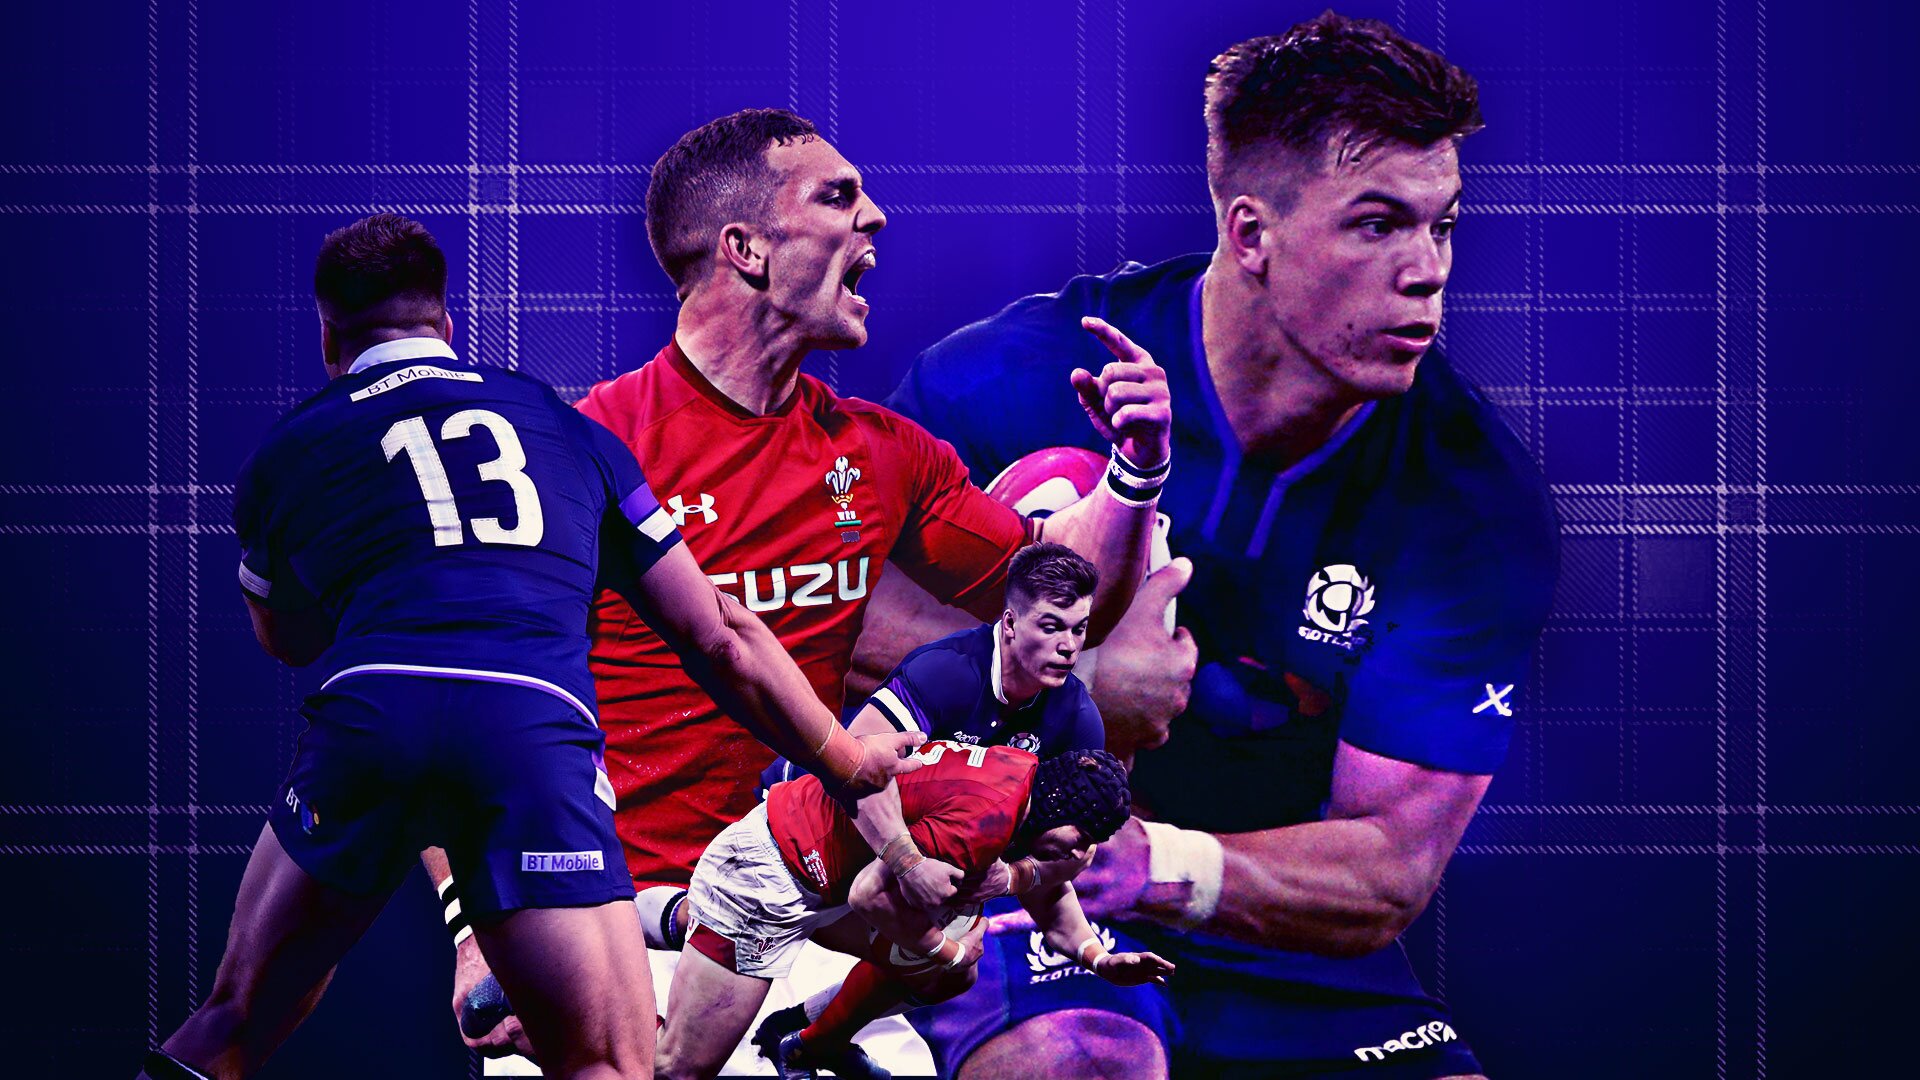 Analysis: Why Scotland's defensive system made Huw Jones look worse than he actually is